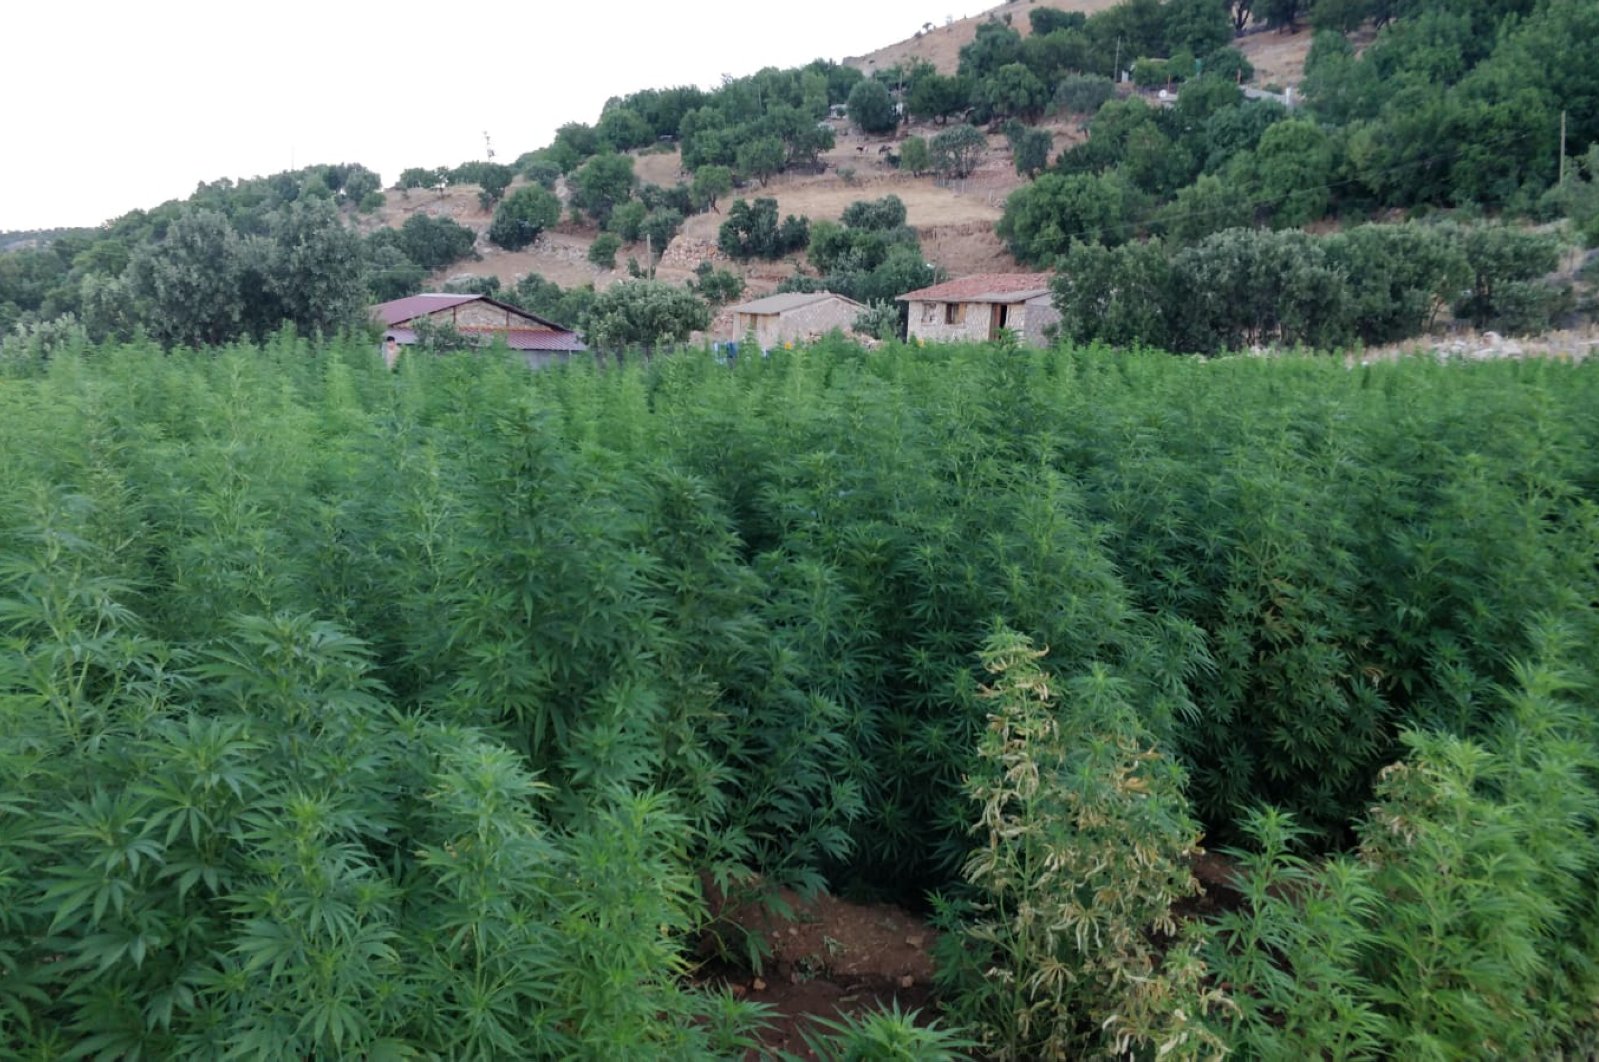 A cannabis field raided by security forces in Diyarbakır province, southeastern Turkey, July 21, 2020. (AA Photo)